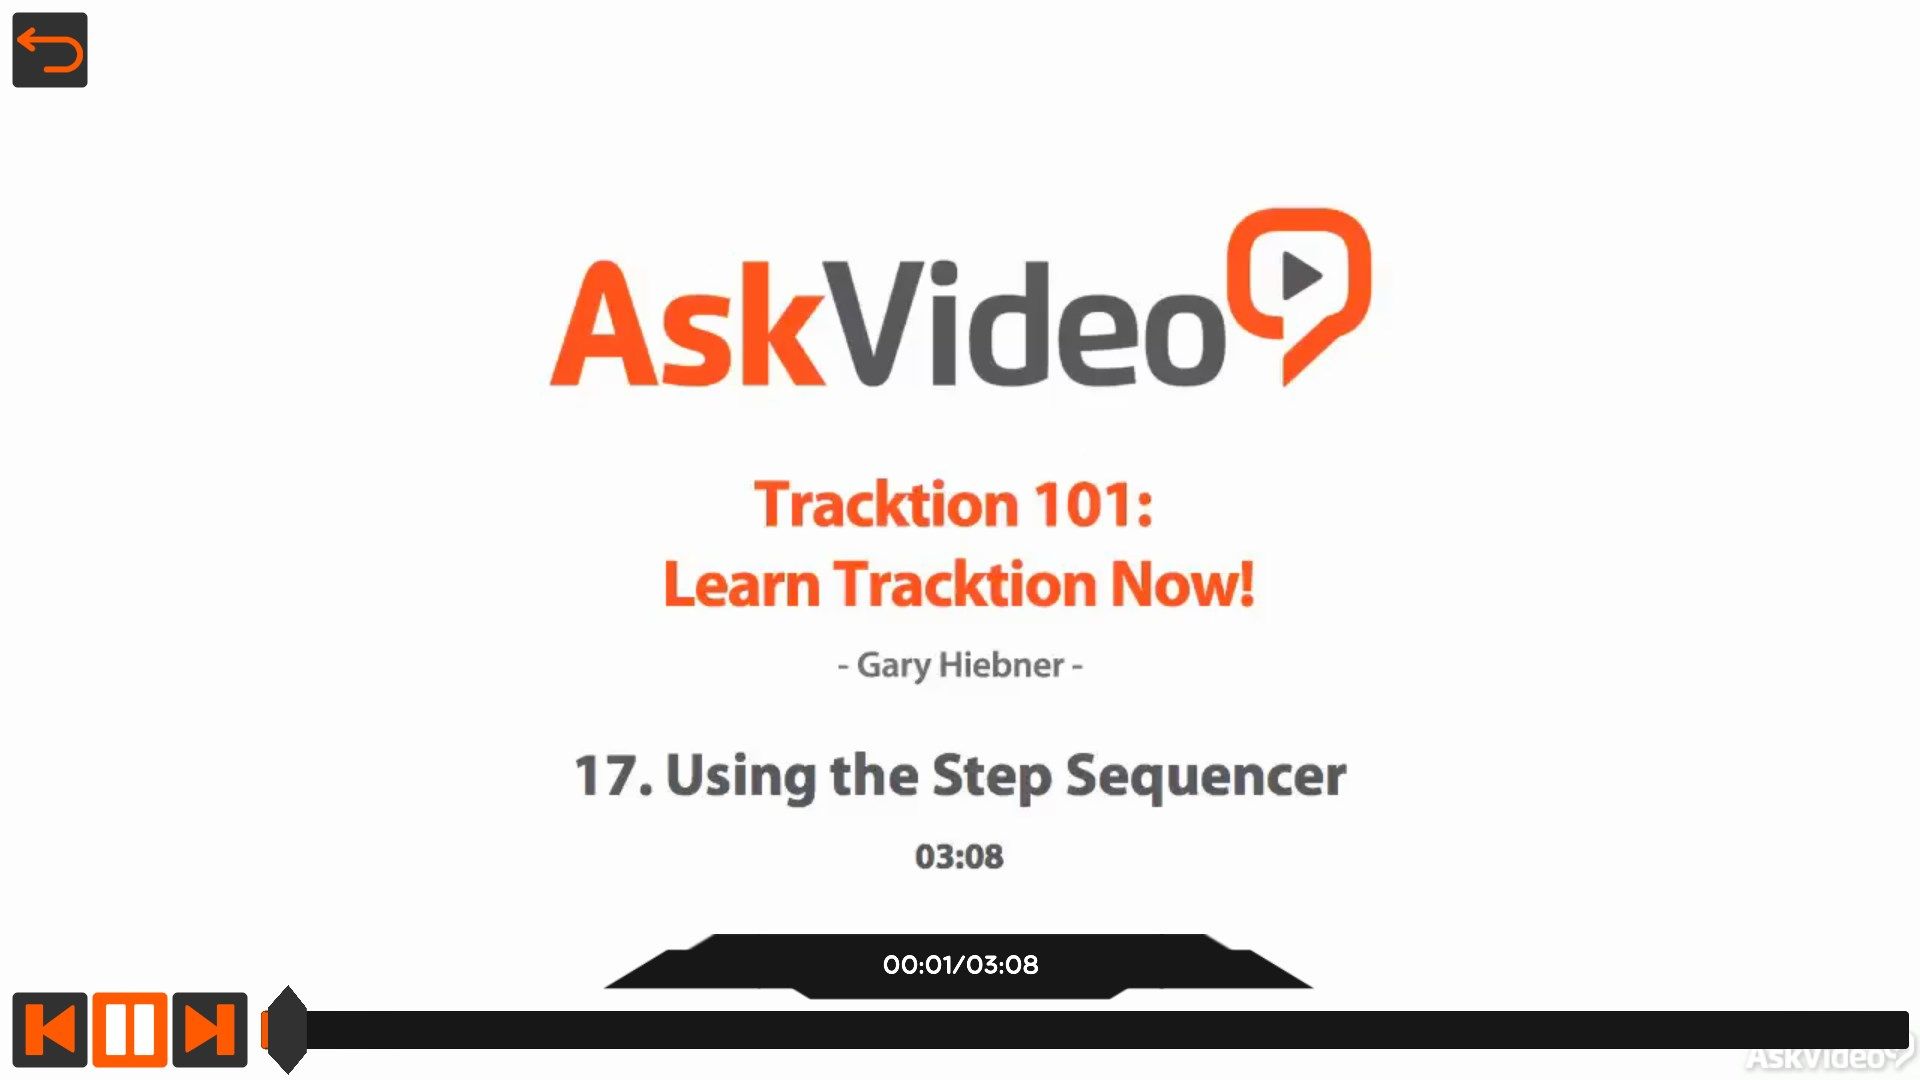 Traction Course by Ask.Video